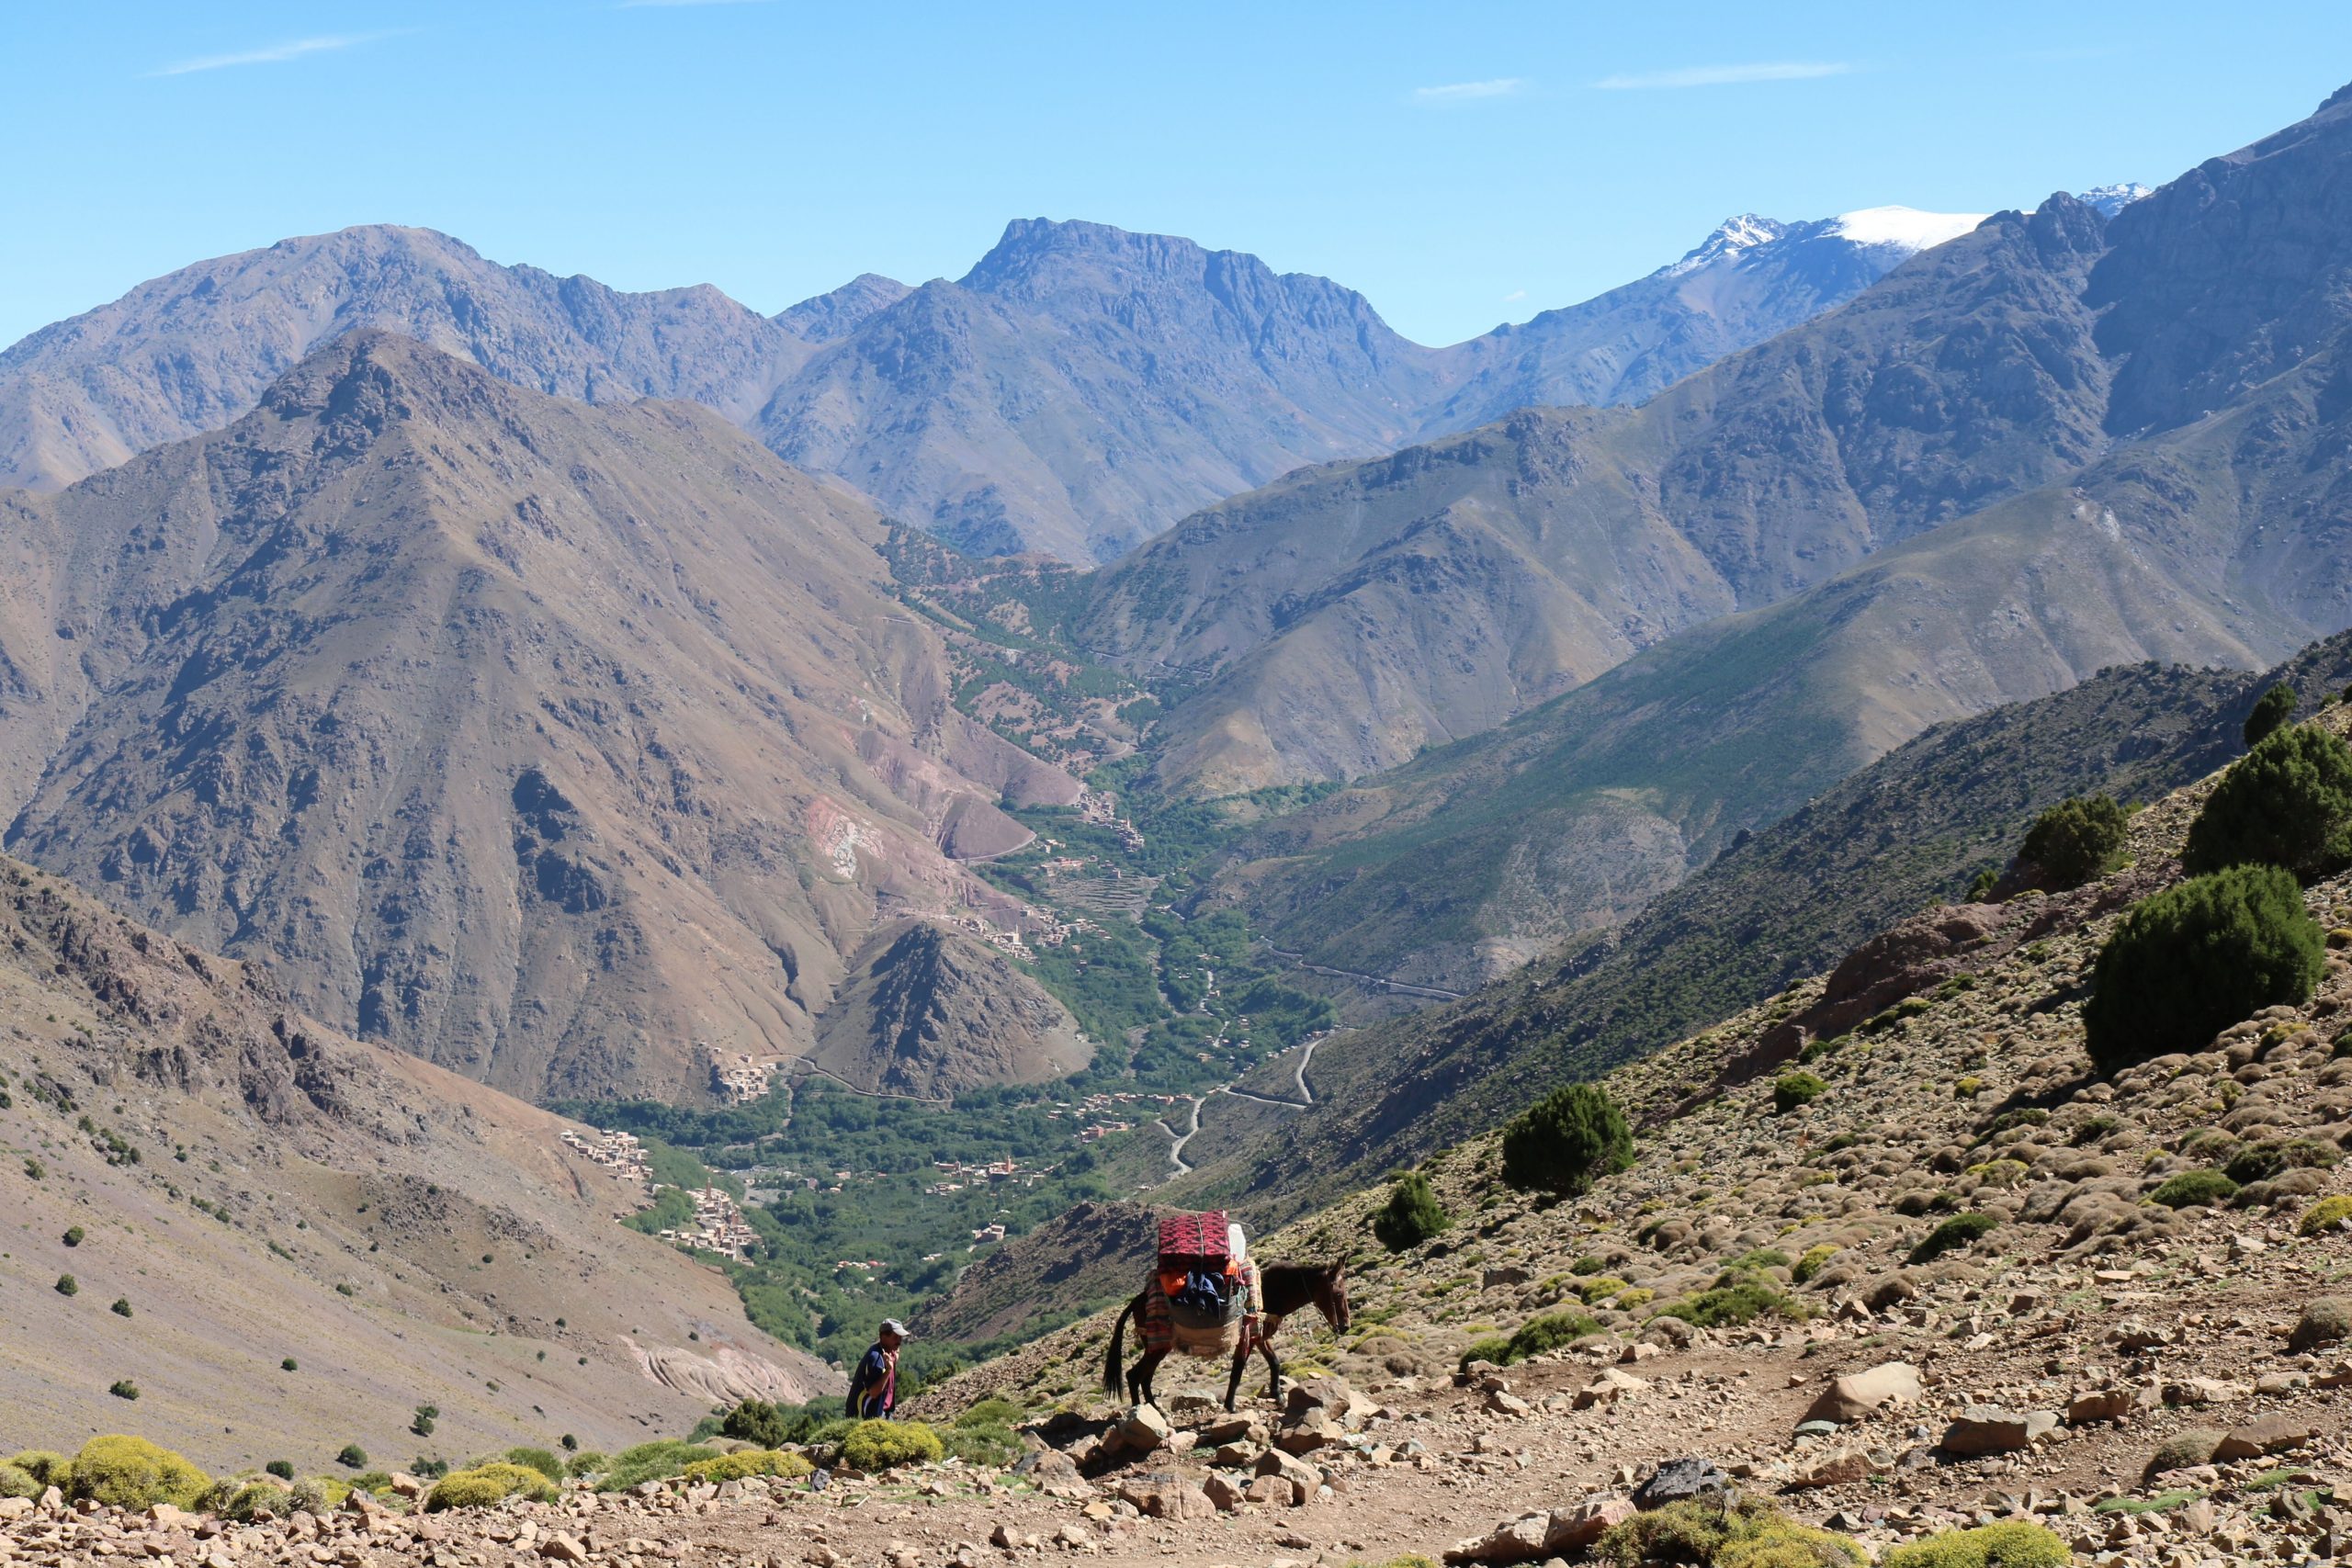 gallery image for 3 Days Hike Toubkal Peak The High Atlas Mountains